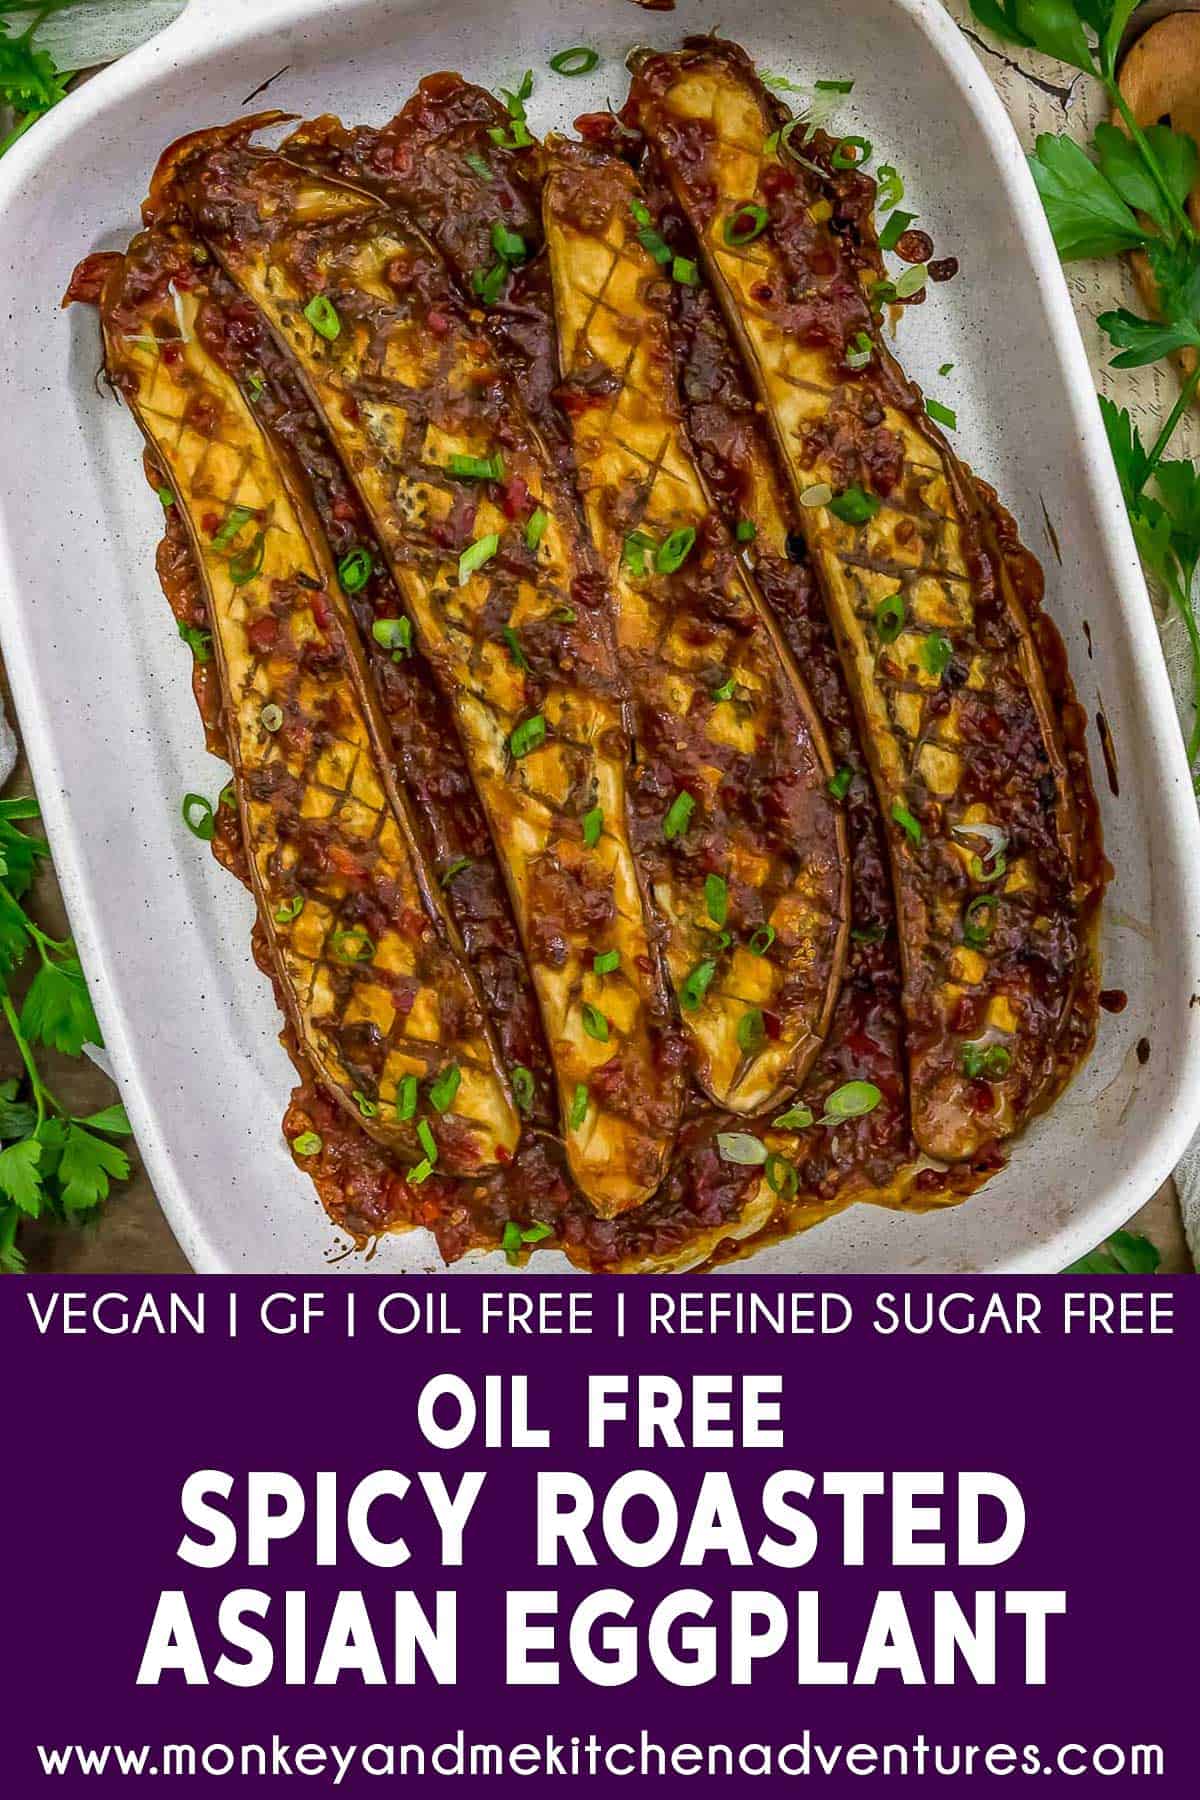 Oil Free Spicy Roasted Asian Eggplant with text description